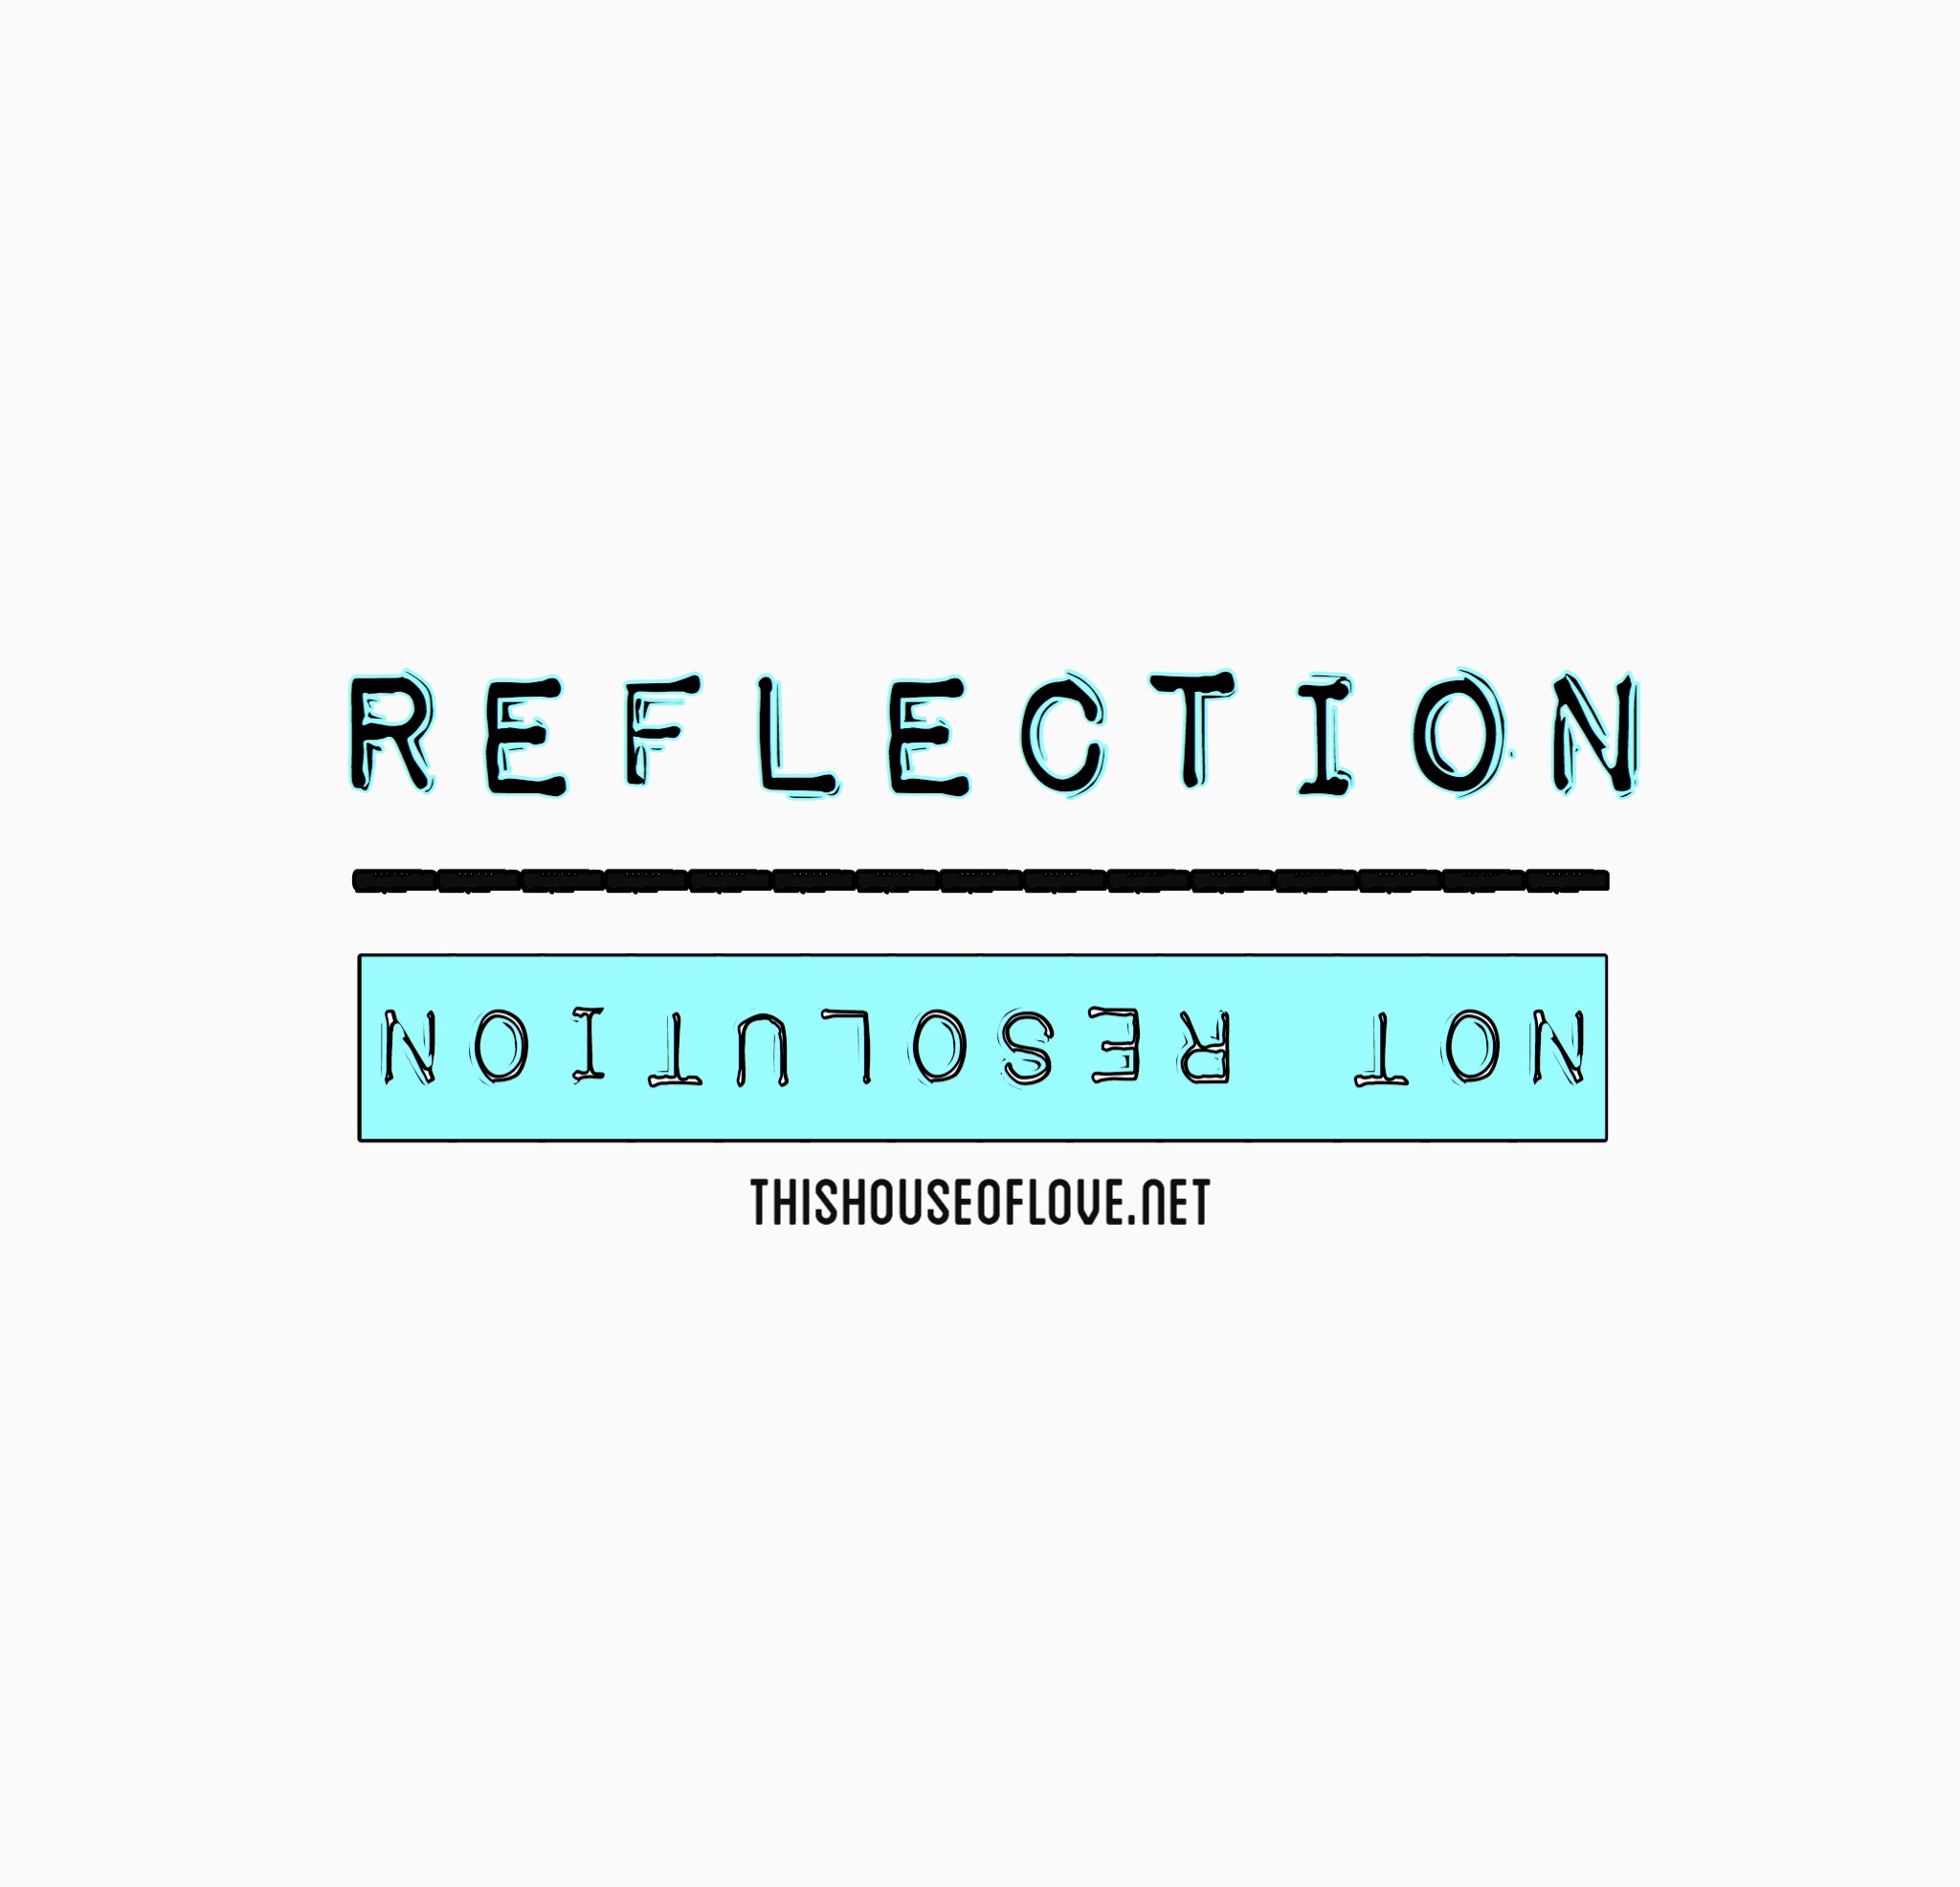 Reflection, not Resolution